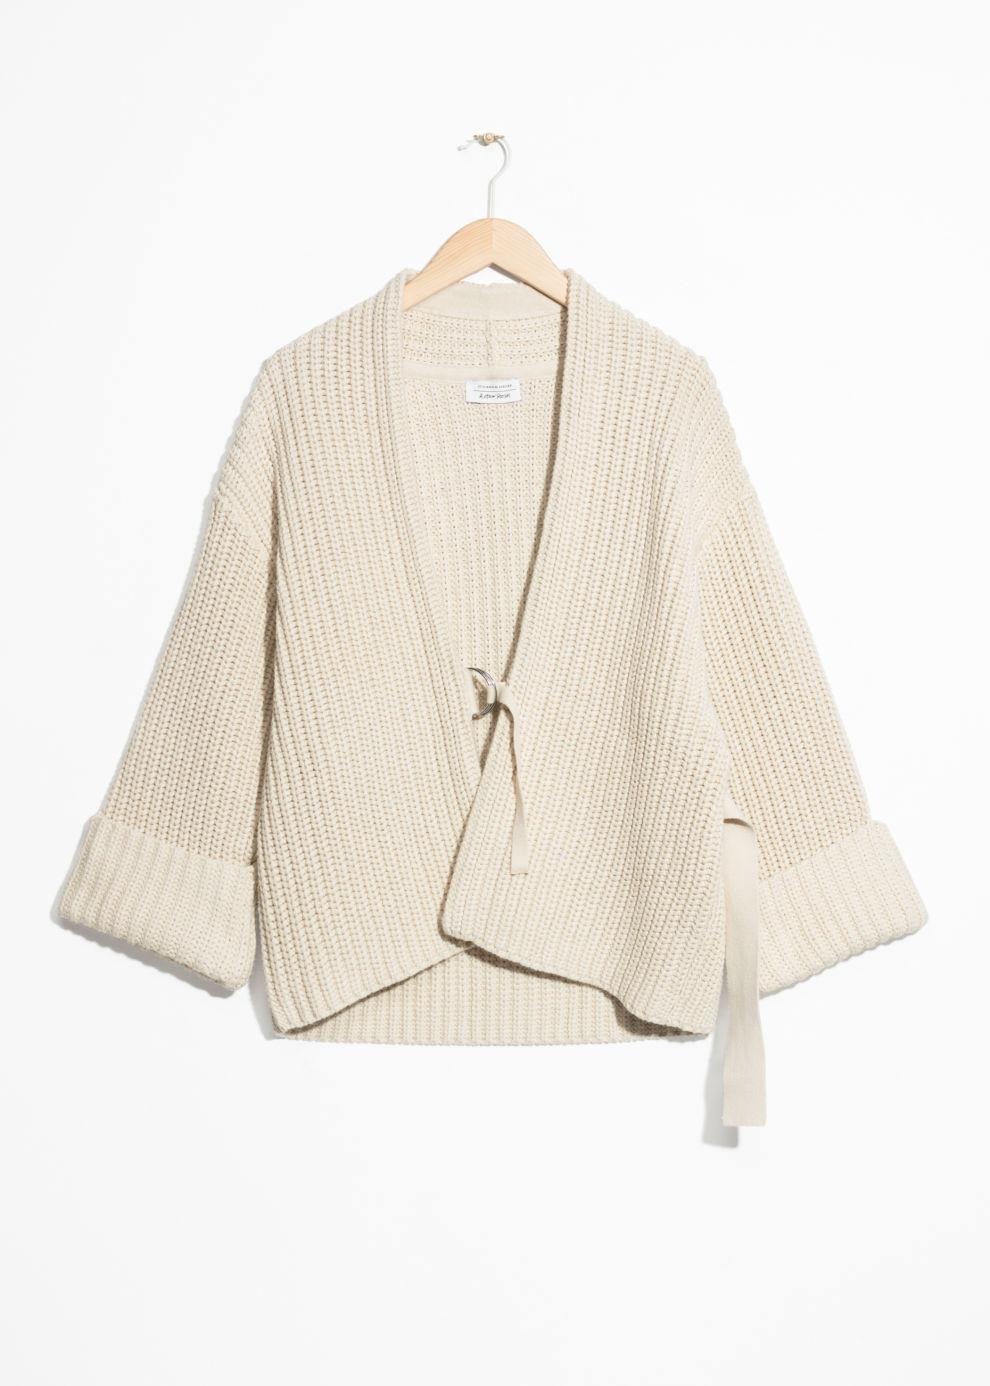 & Other Stories Cotton Belted Cardigan in Beige (Natural) - Lyst